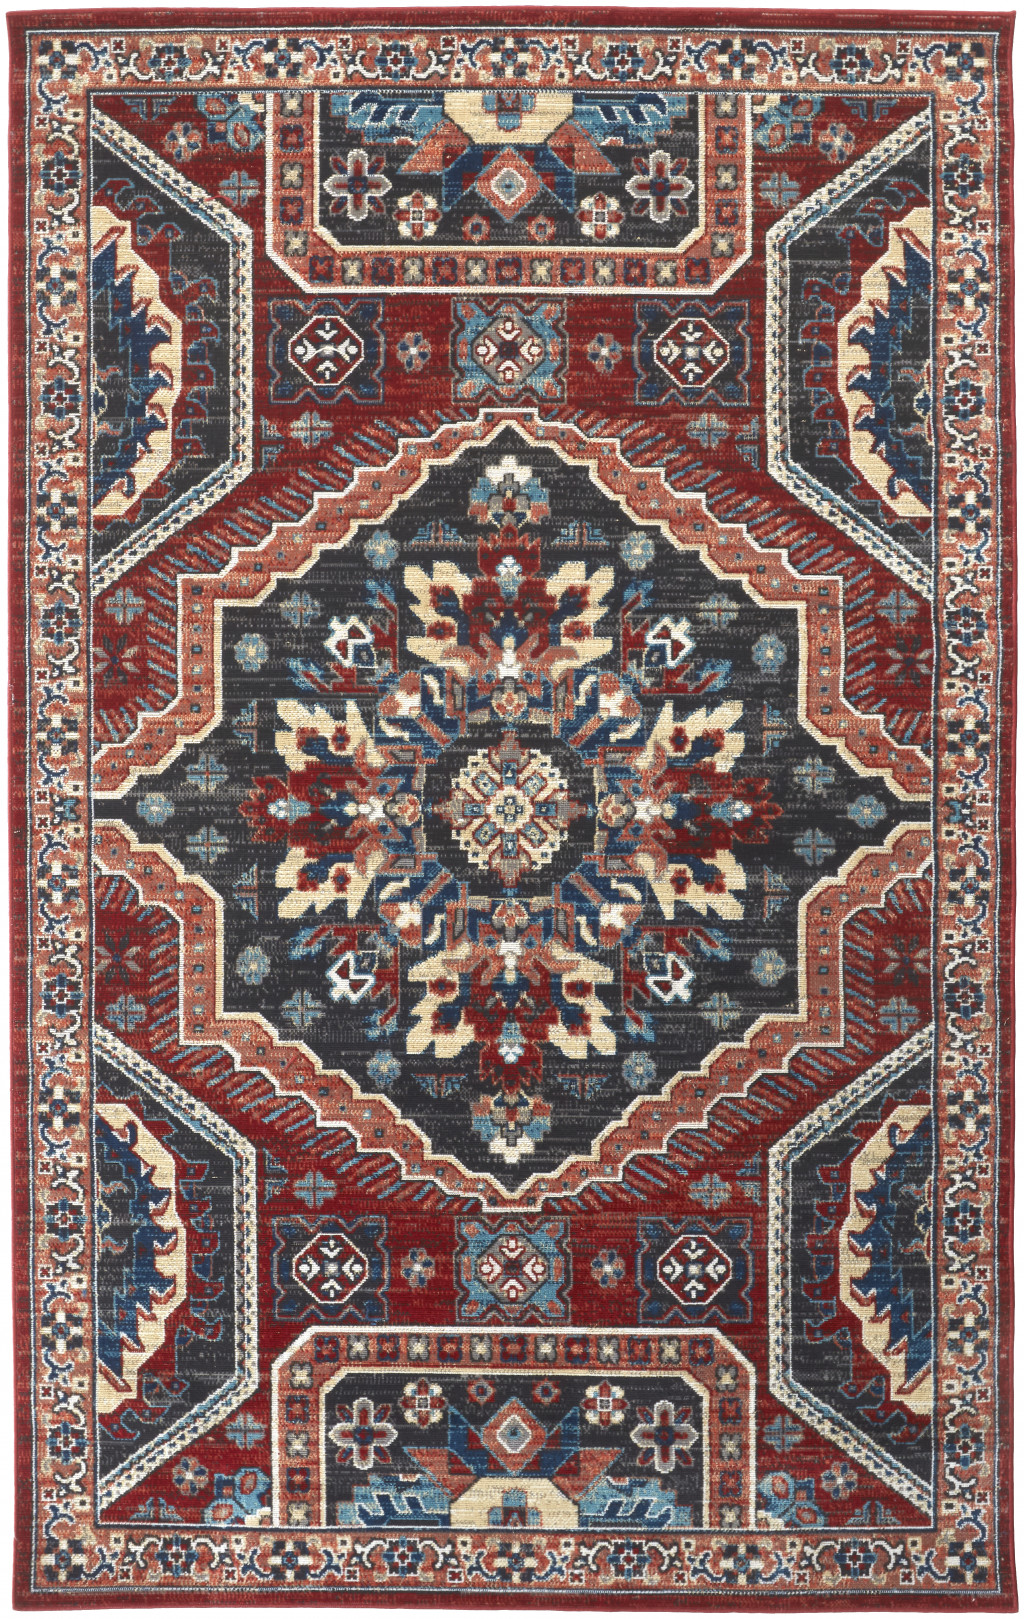 8' X 11' Red Gray And Tan Abstract Power Loom Distressed Stain Resistant Area Rug-514676-1